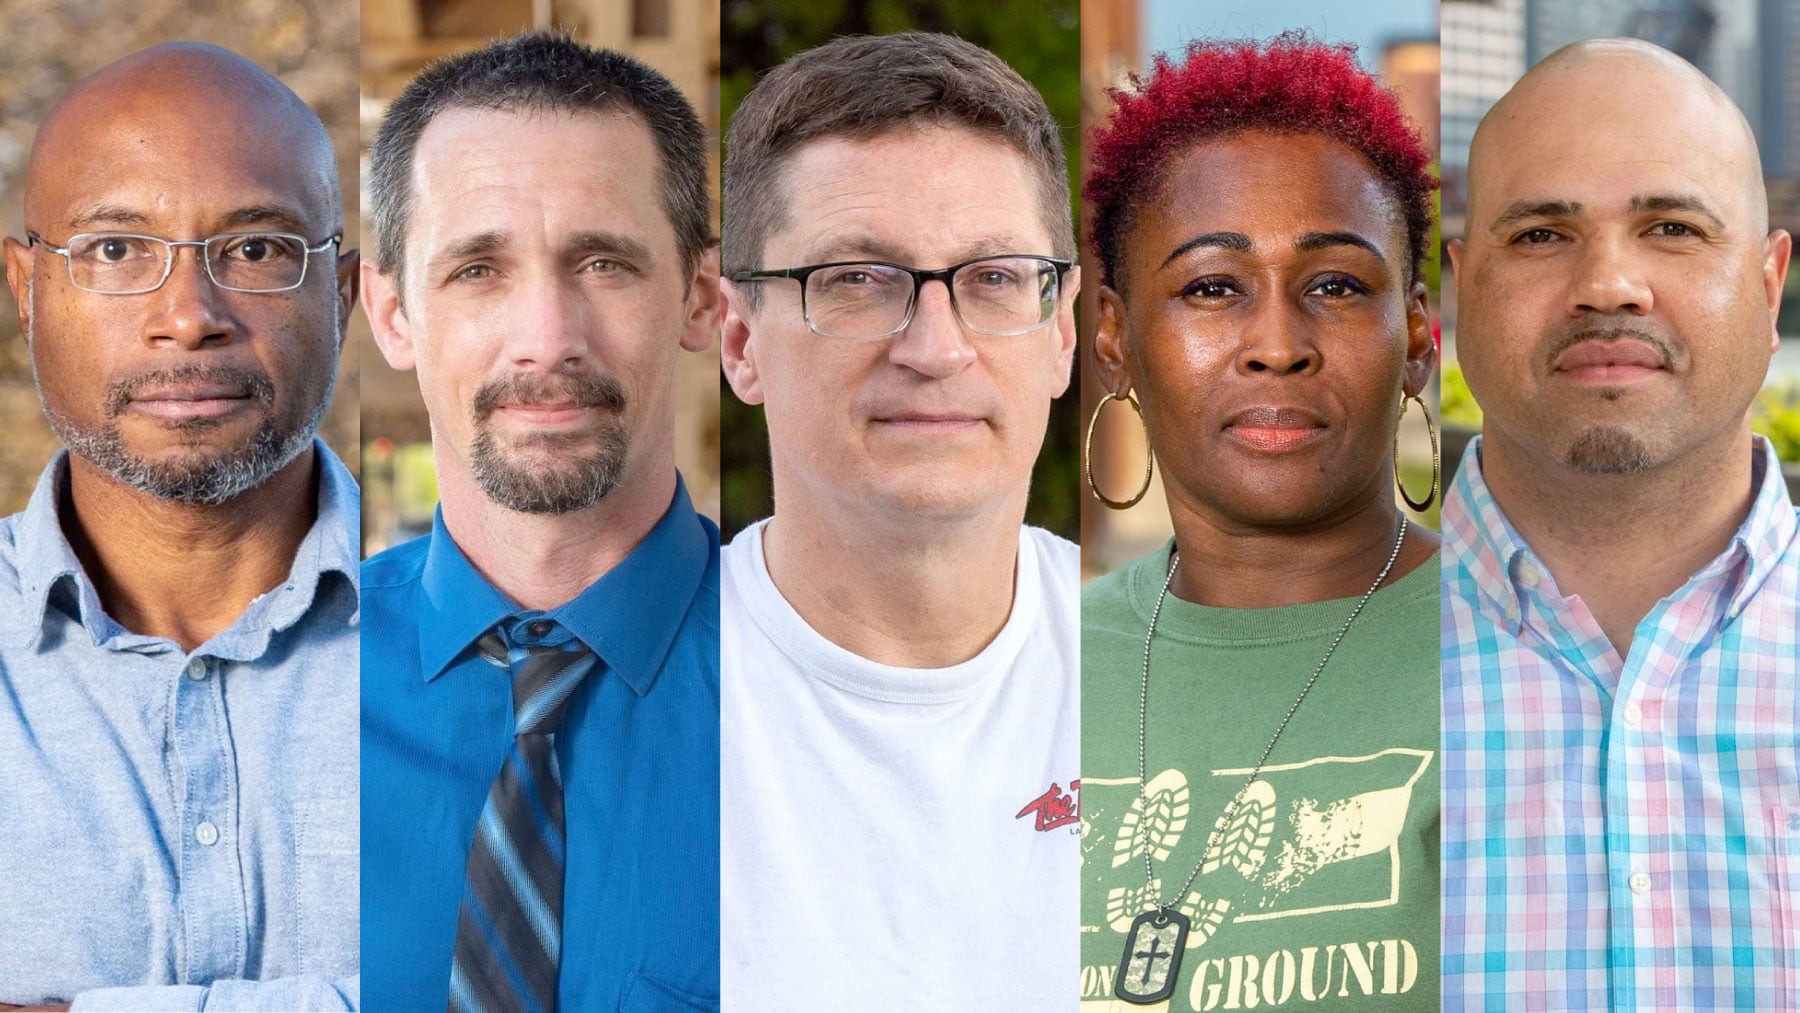 Portraits of the five FIRSTHAND: Life After Prison participants